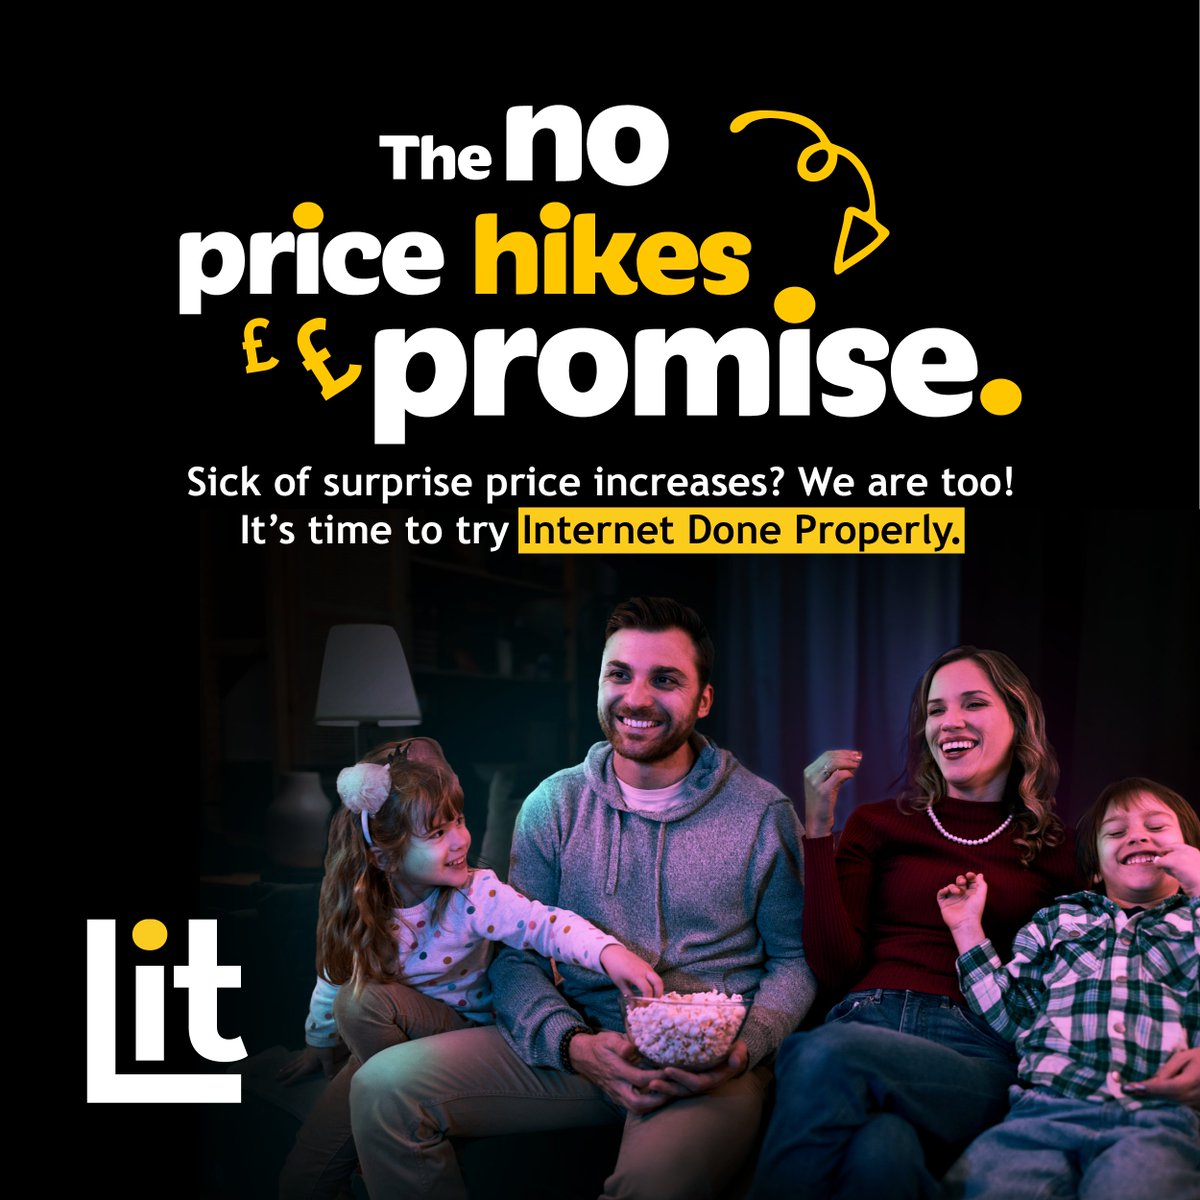 On our burn list, we’ve added mid-contract price hikes ✋ It’s something that so many have accepted as the norm for broadband, when really, it’s not okay! You really do deserve #InternetDoneProperly. Want to find out what that means for you? litfibre.com/blog/internet-… #PriceHikes